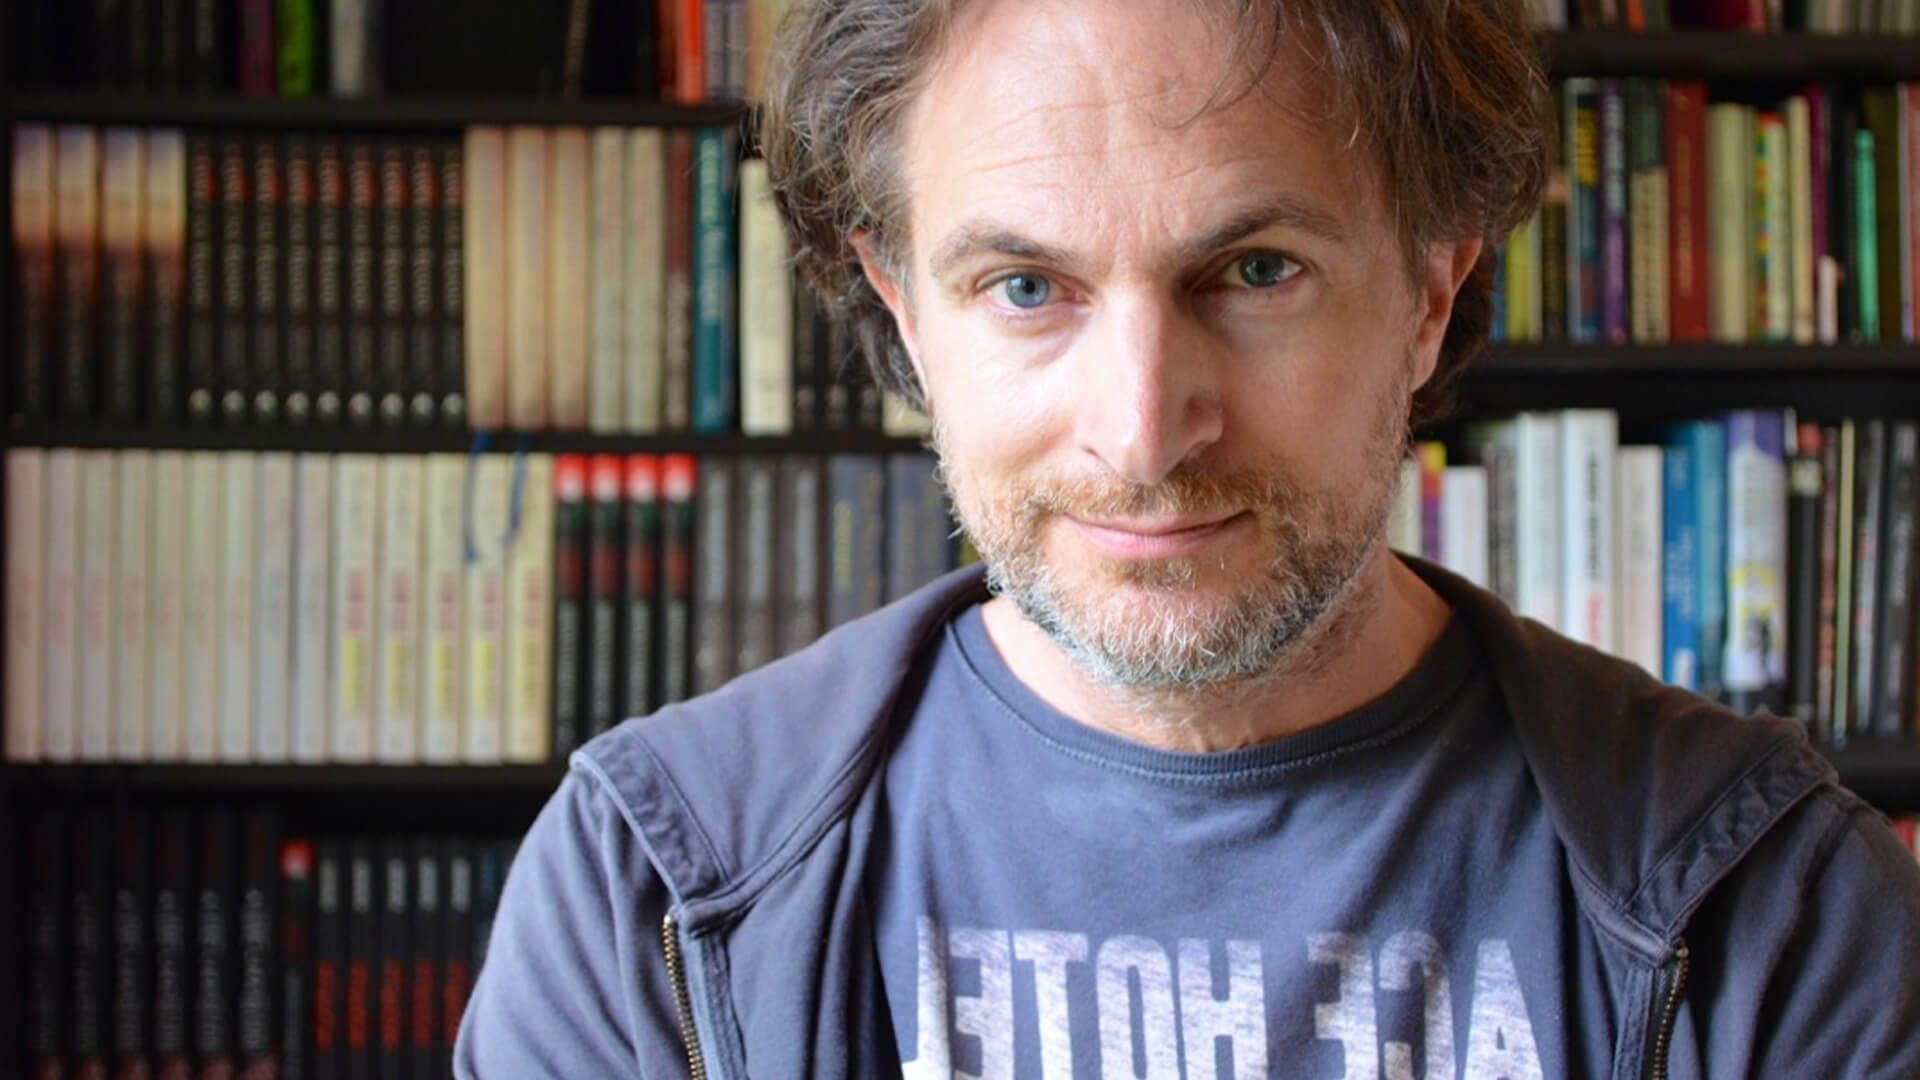 Children's Literature World Mourns Author Marcus Sedgwick, Who has Died at 54